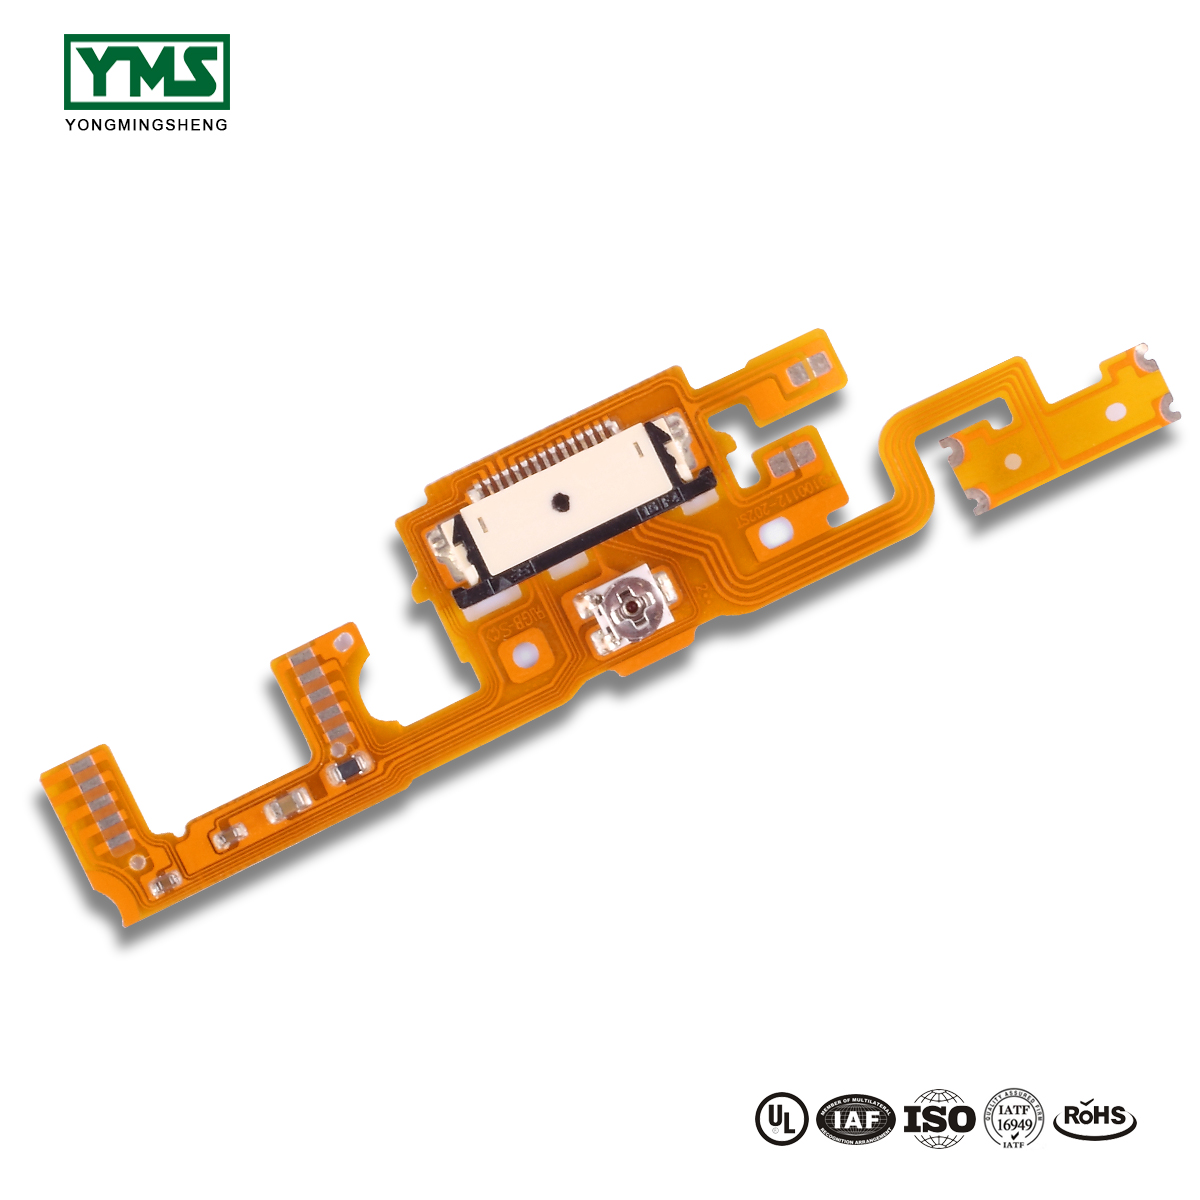 China Factory for Small Volume Pcb - 1Layer Flexible Board | YMSPCB – Yongmingsheng